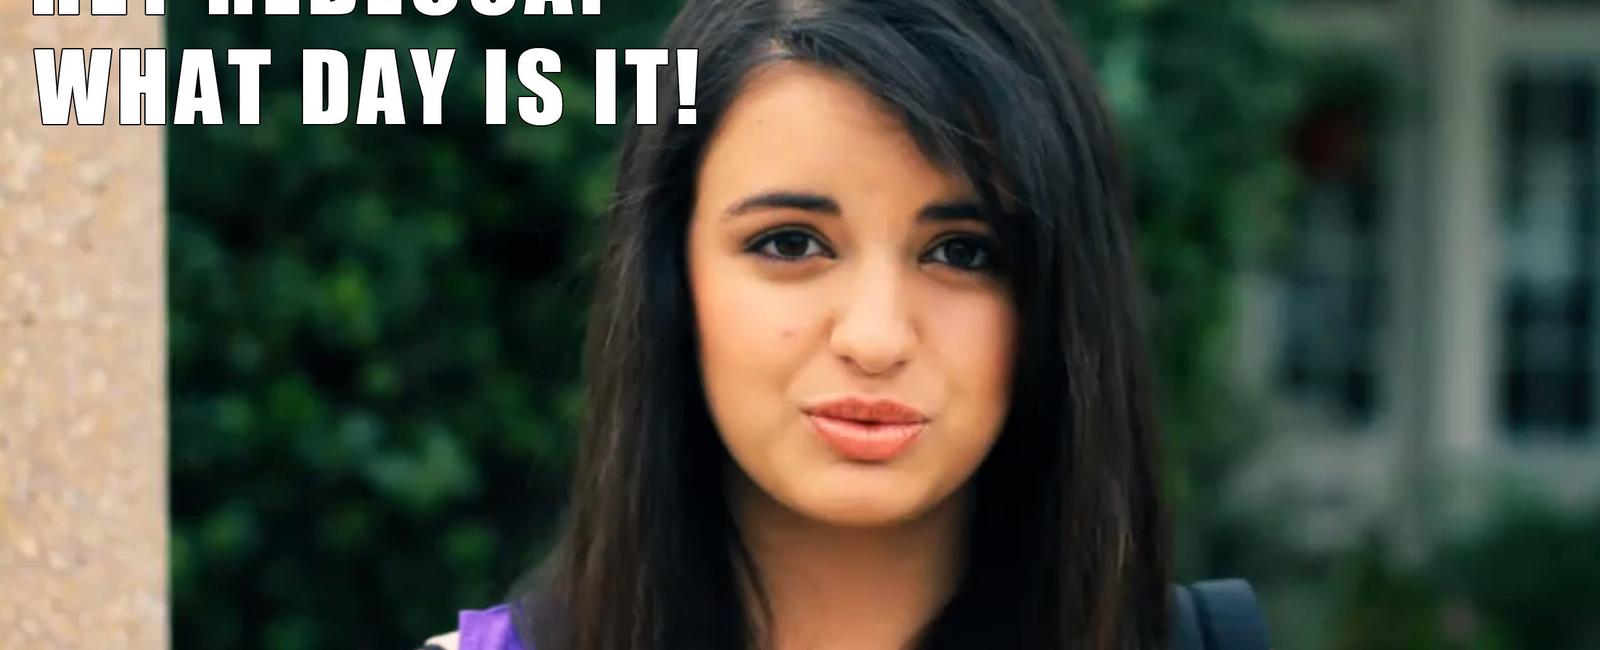 Rebecca black and the cure are in love with this 24 hour time period friday